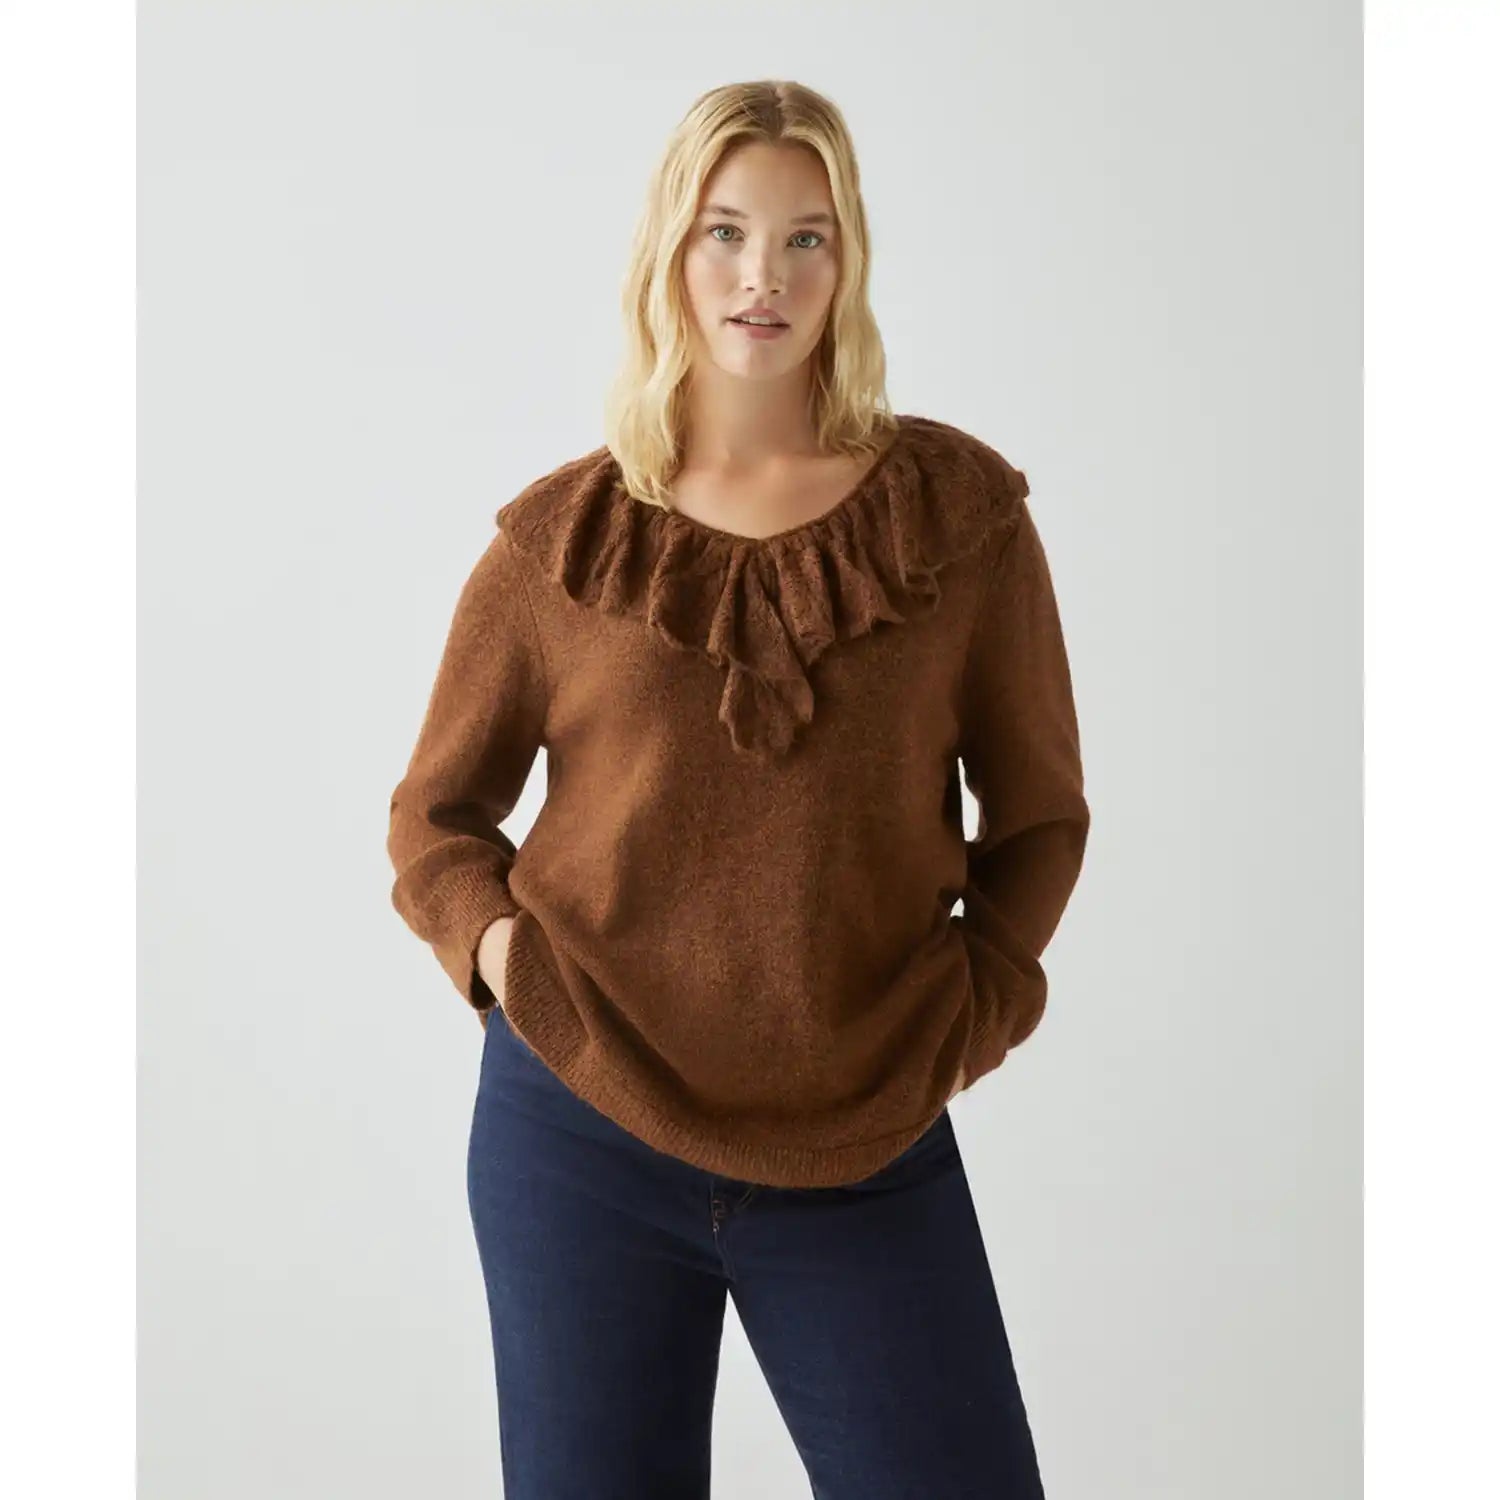 Couchel Tricot Sweater With Ruffle Neck - Brown 1 Shaws Department Stores